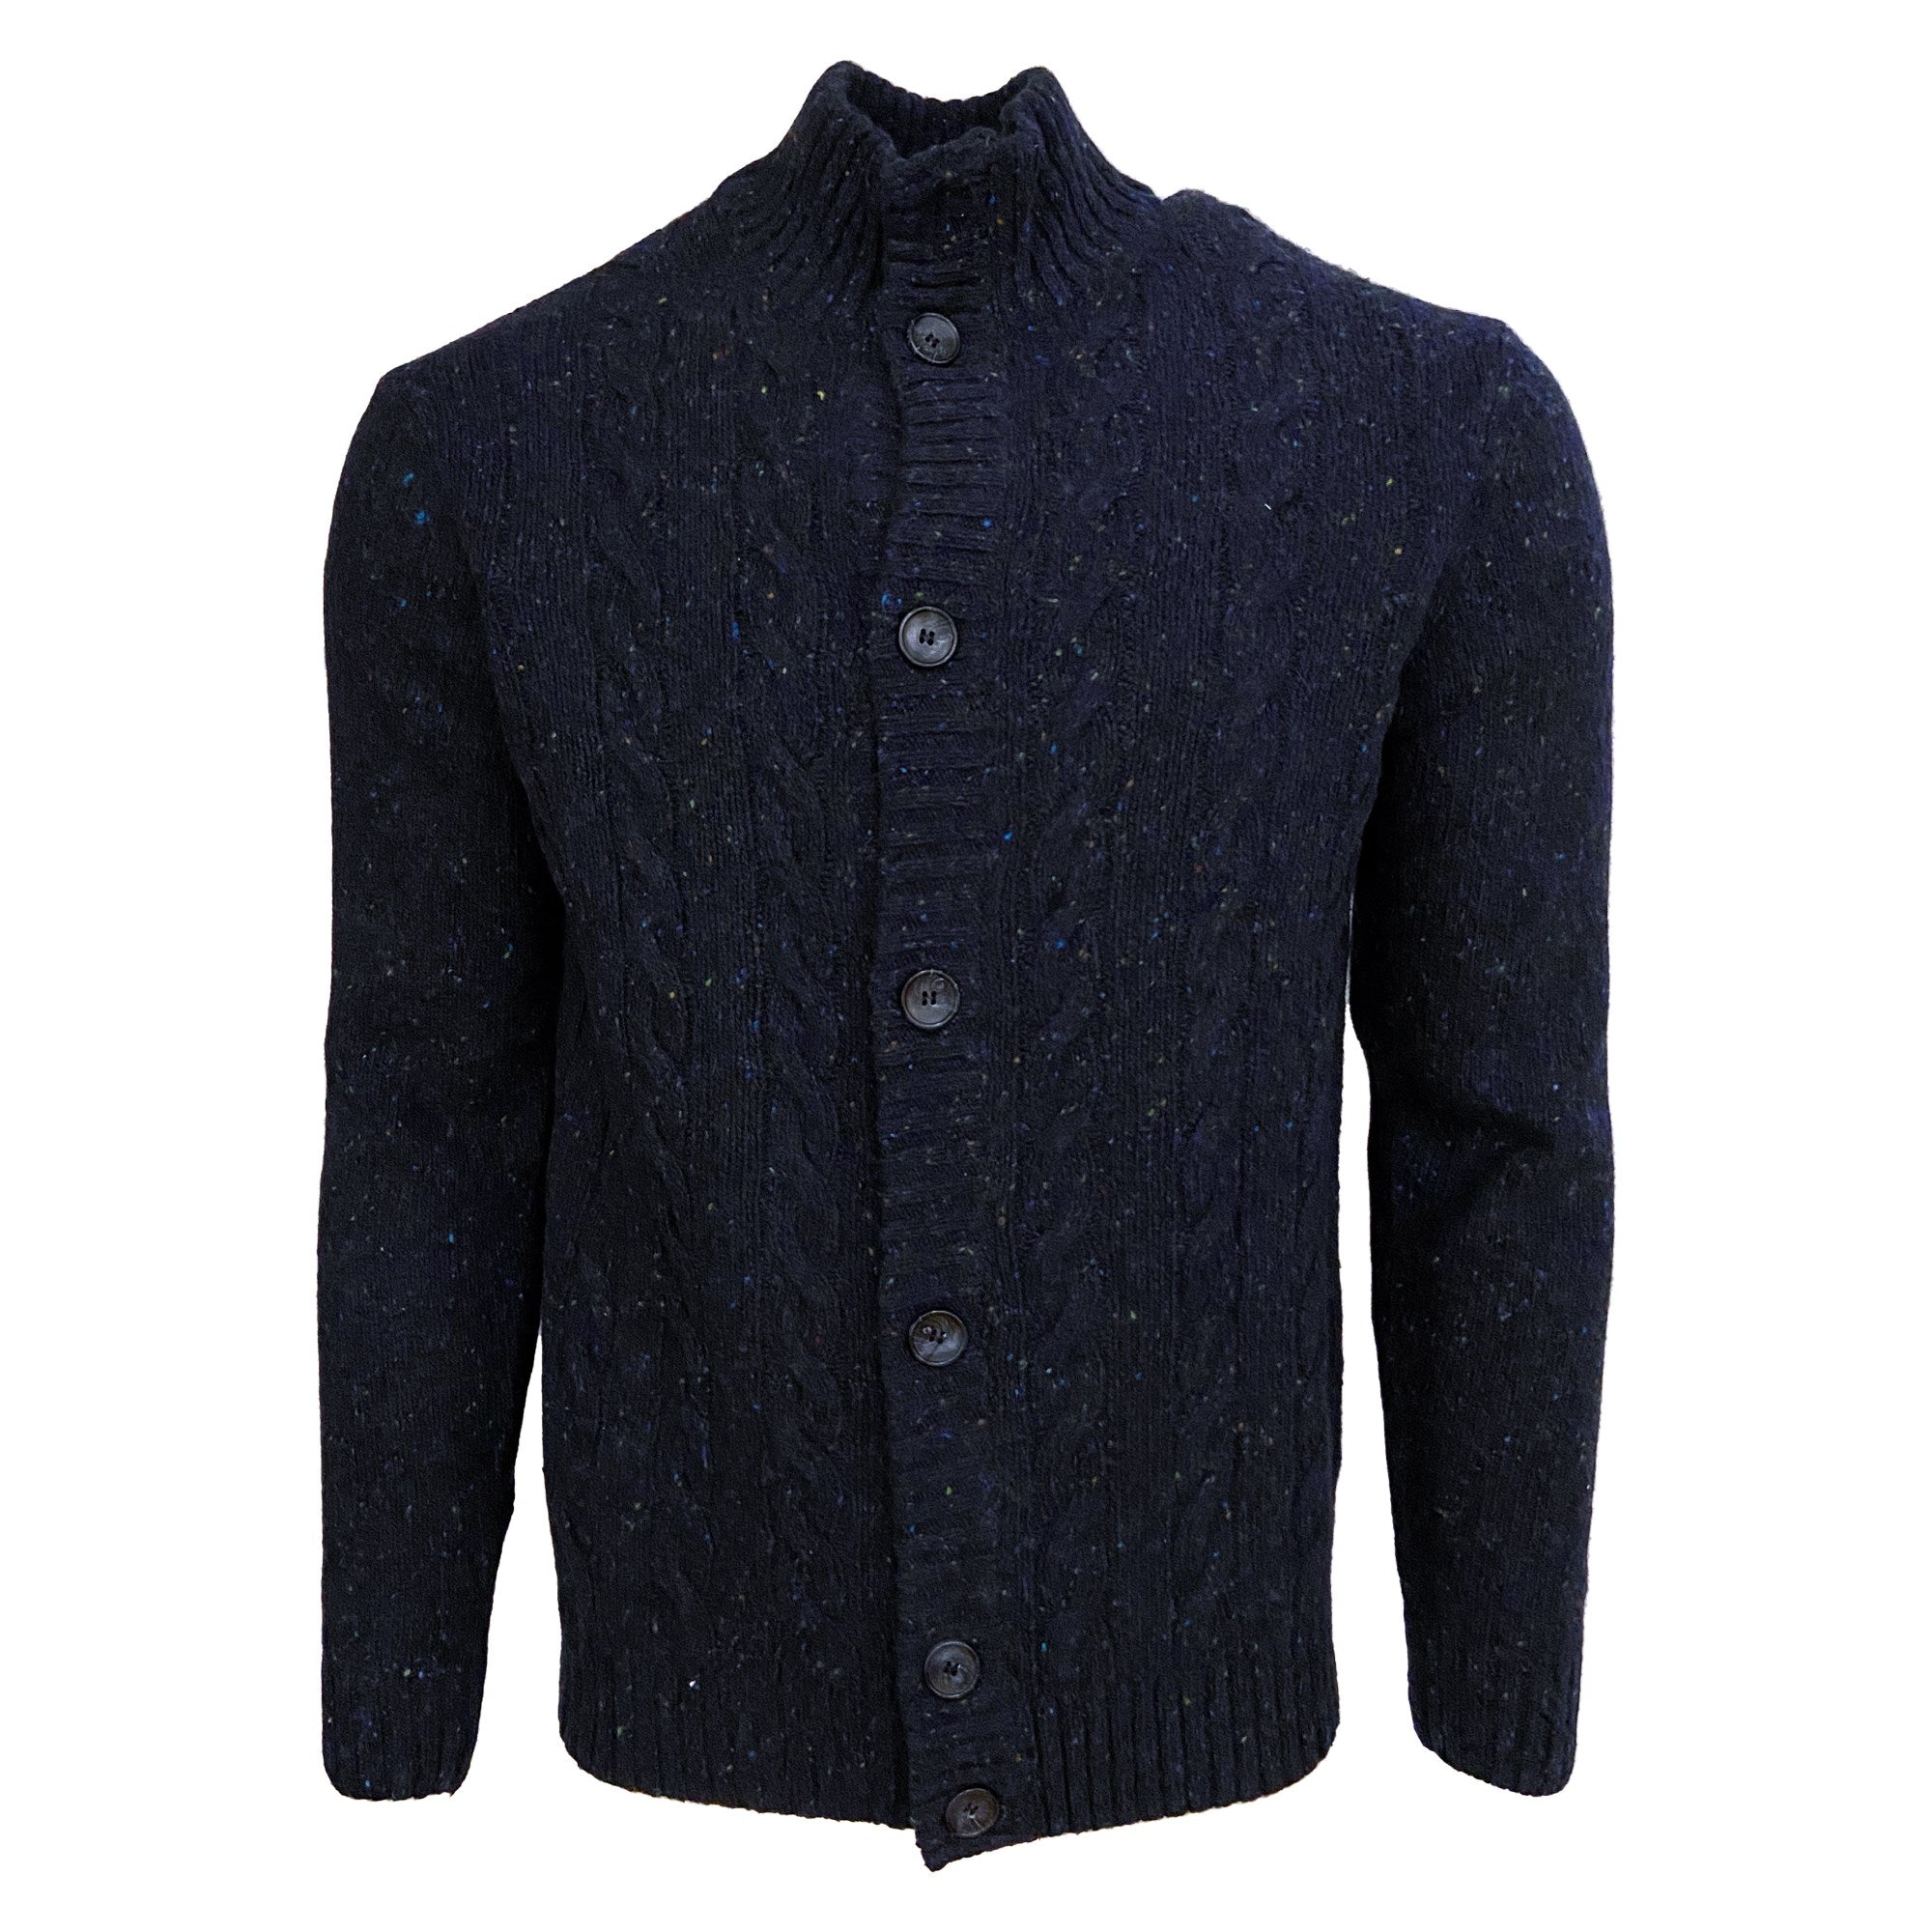 Marled Wool Blend Cable Knit Mock Neck Button-Front Cardigan Sweater in Indigo by Viyella